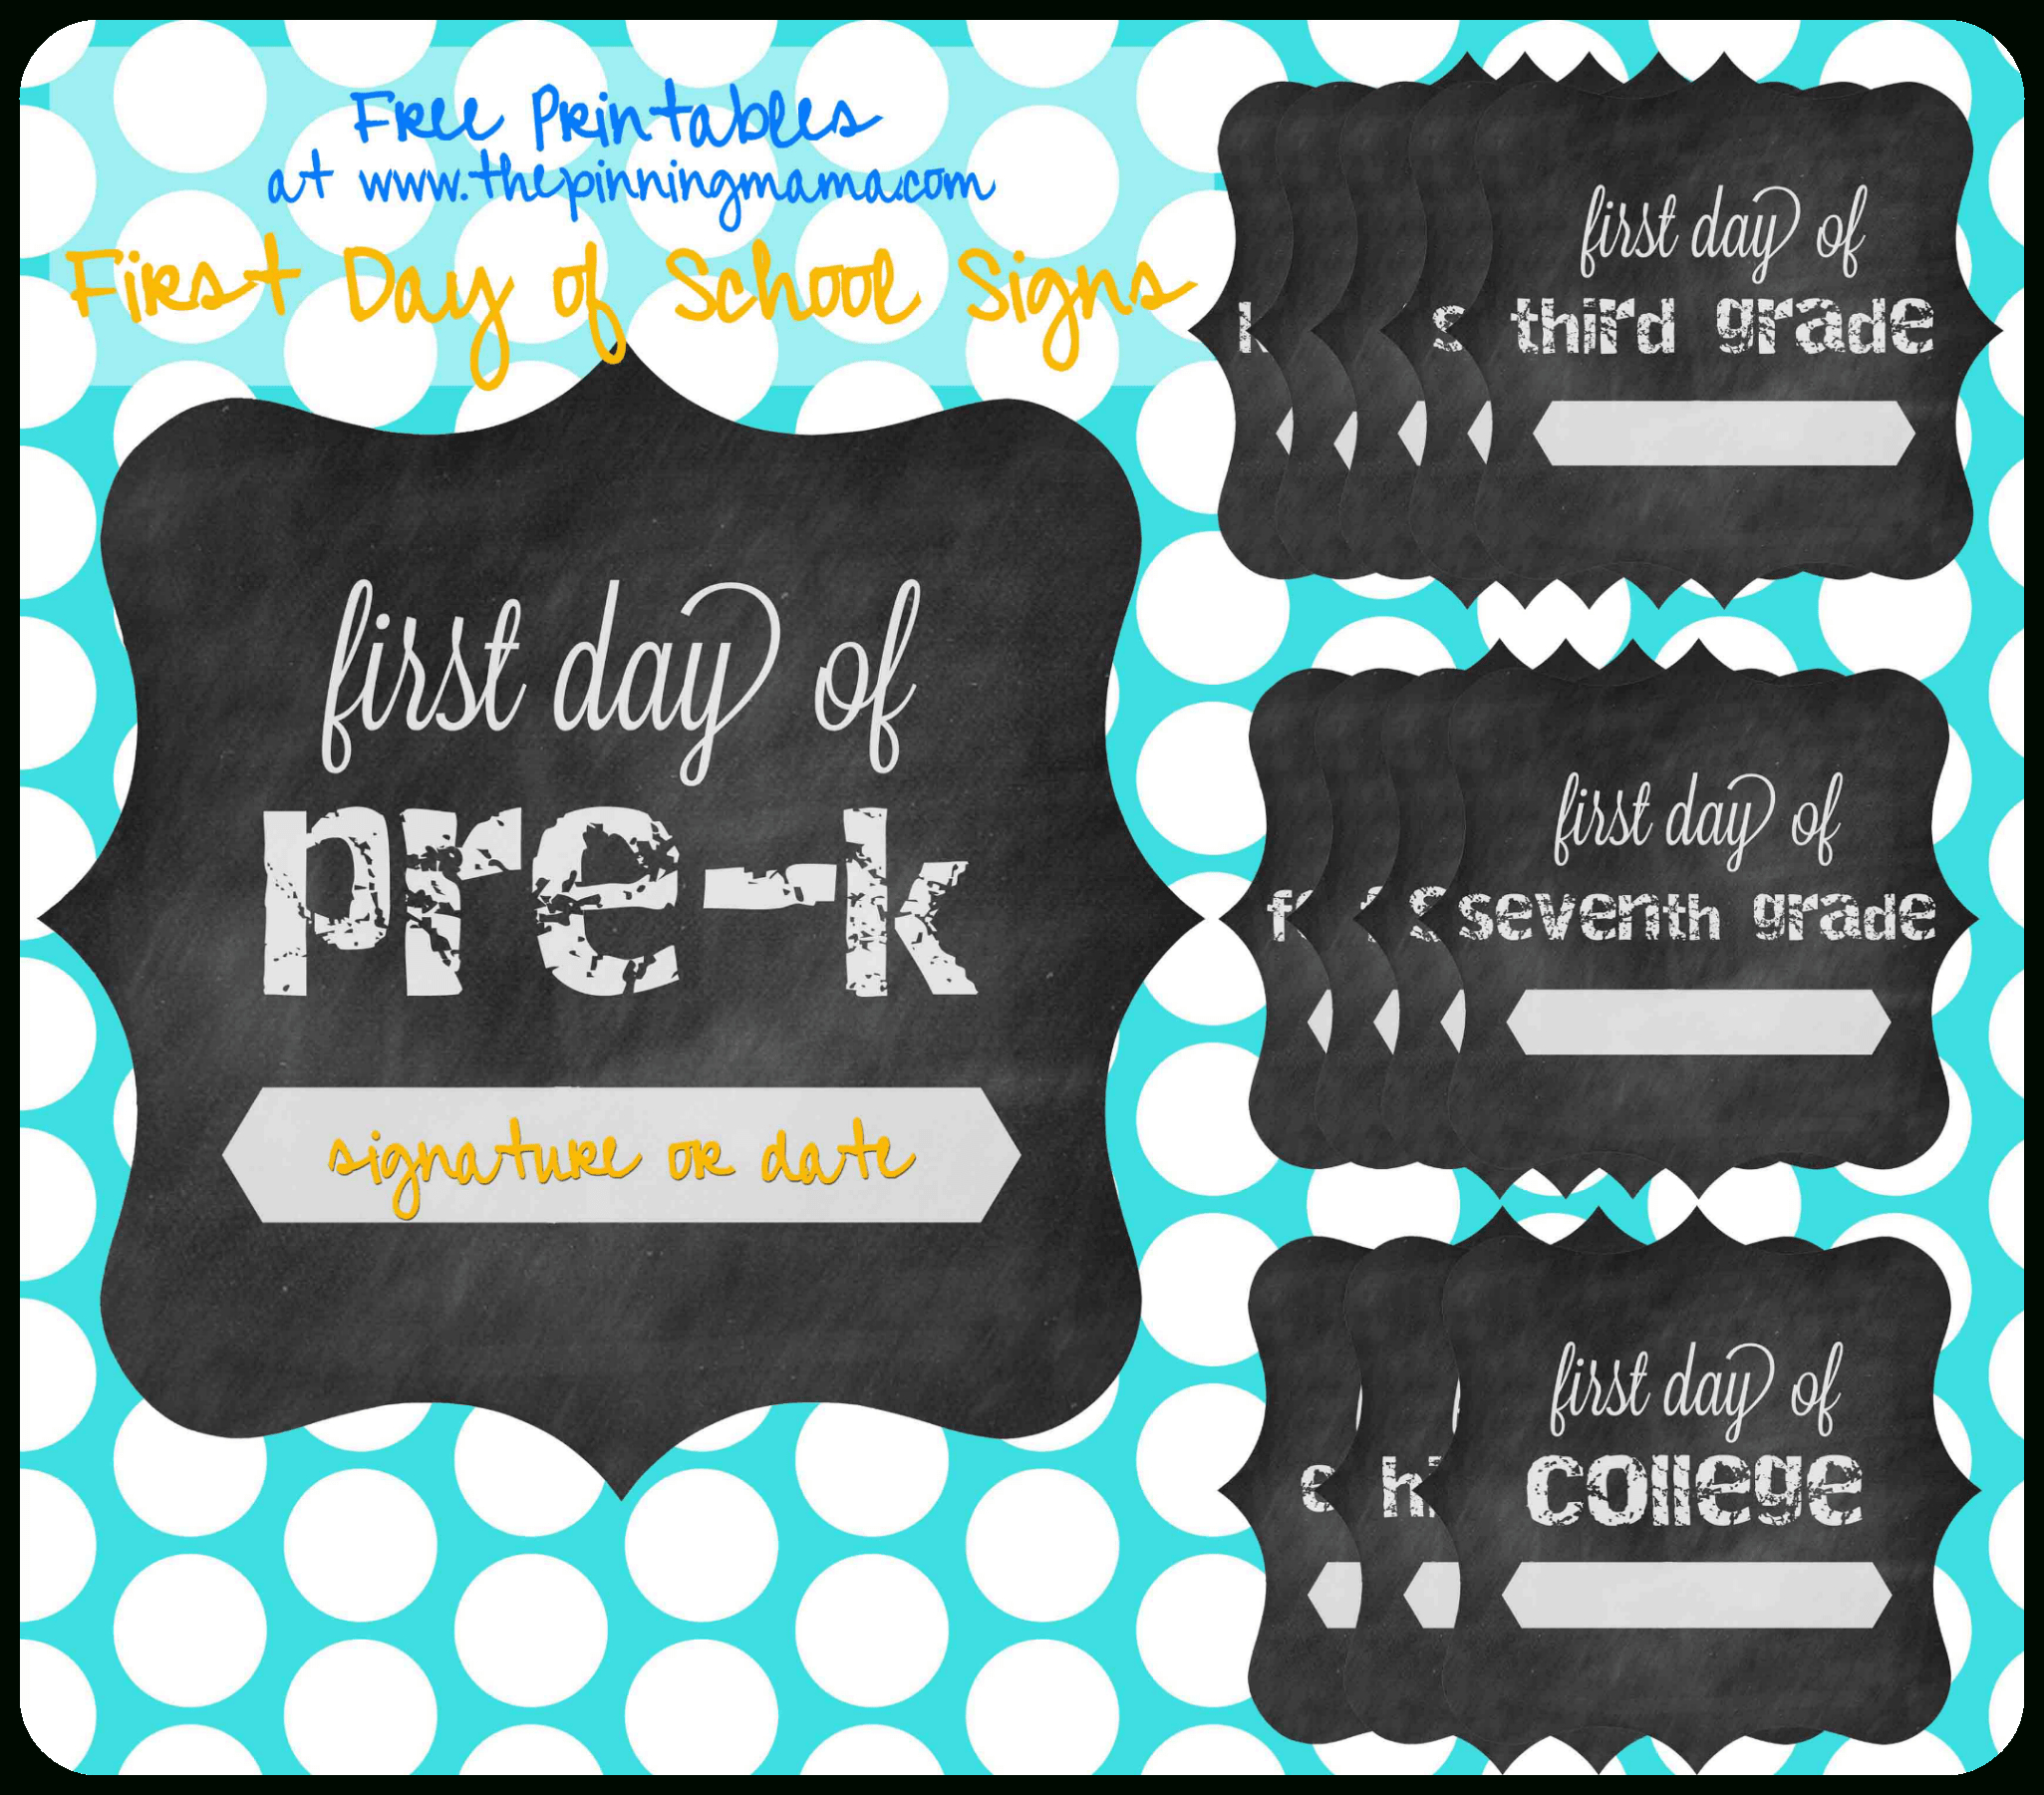 Free Printable} First Day Of School Chalkboard Sign • The Pinning Mama - Free Printable First Day Of School Signs